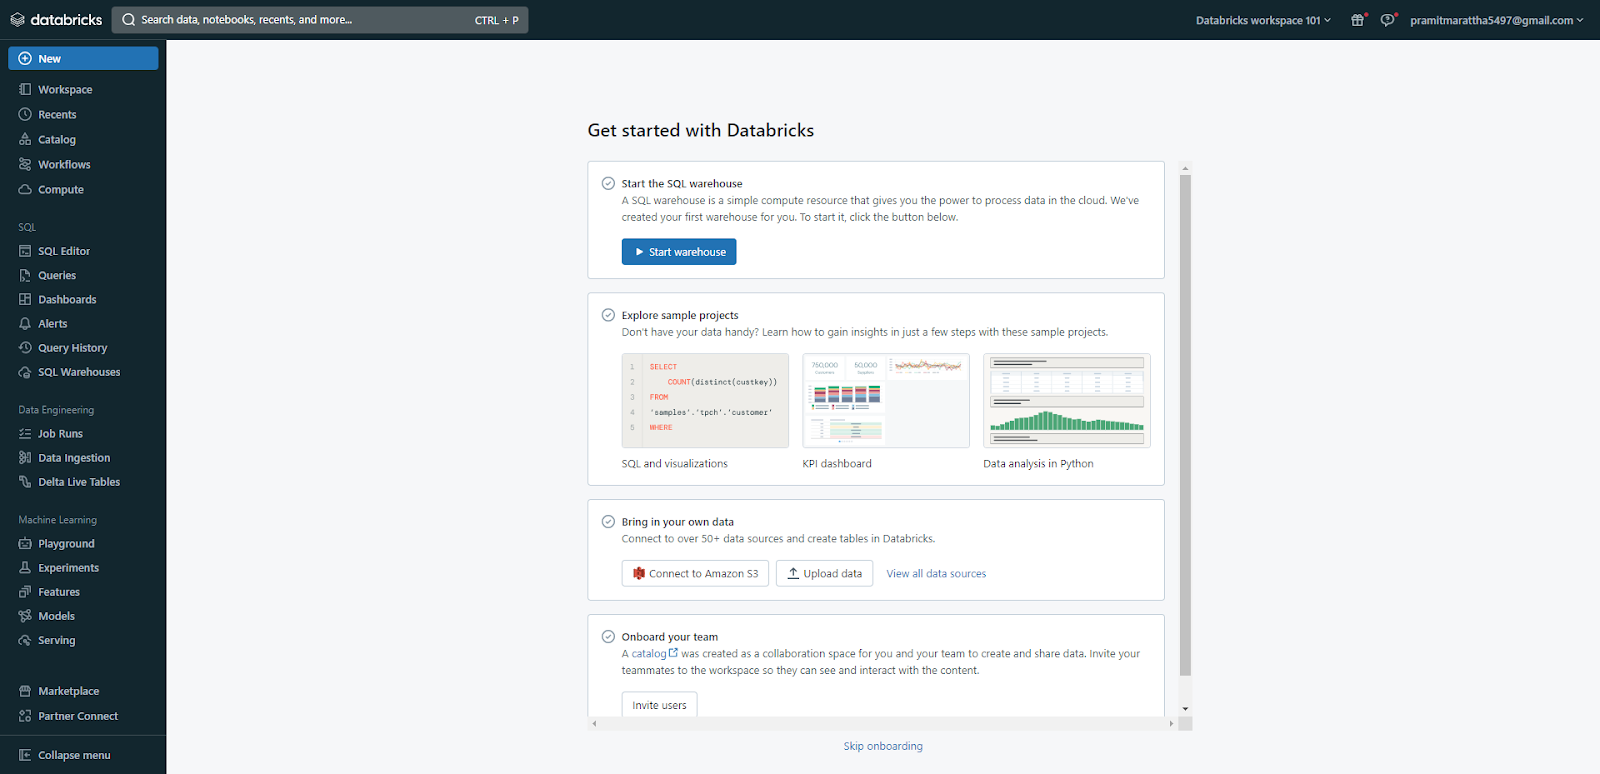 Click on the newly created Databricks workspace to launch and start using it